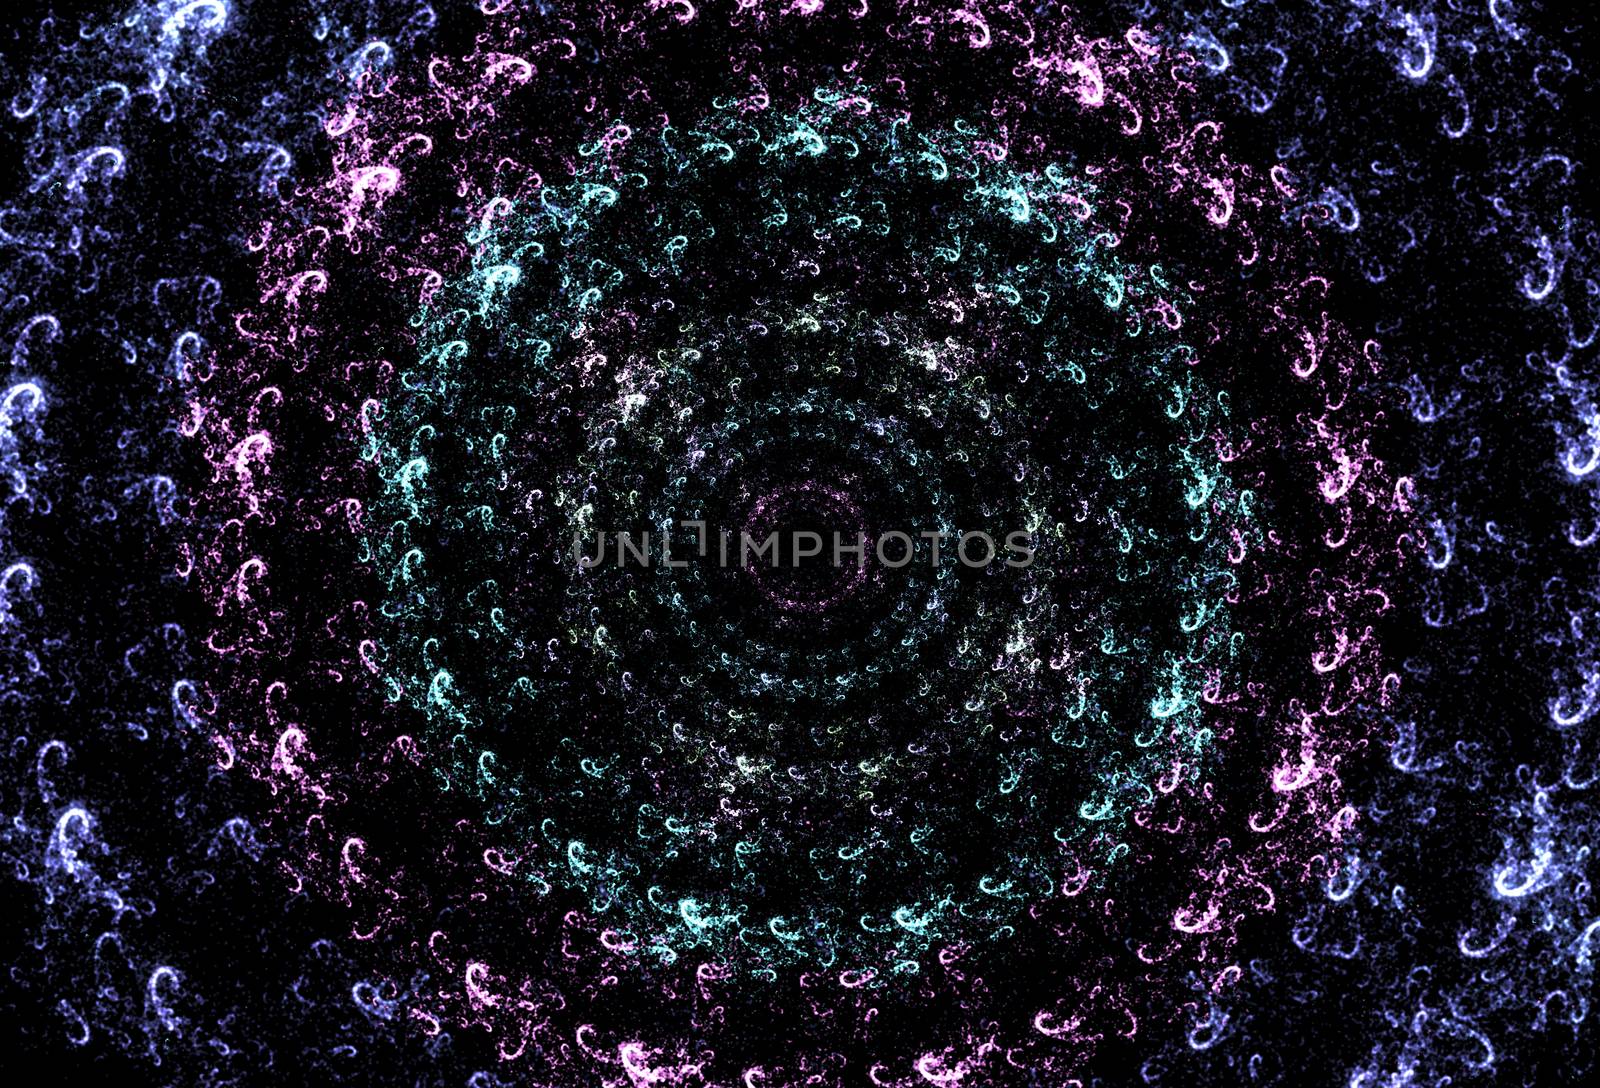 Digital Art: Fractal Graphics: The Time Tunnel / Space Rings / Galaxy Portal. Fantastic Wallpaper / Background / Scene Design. Sci-Fi / Abstract Style. by NextMars